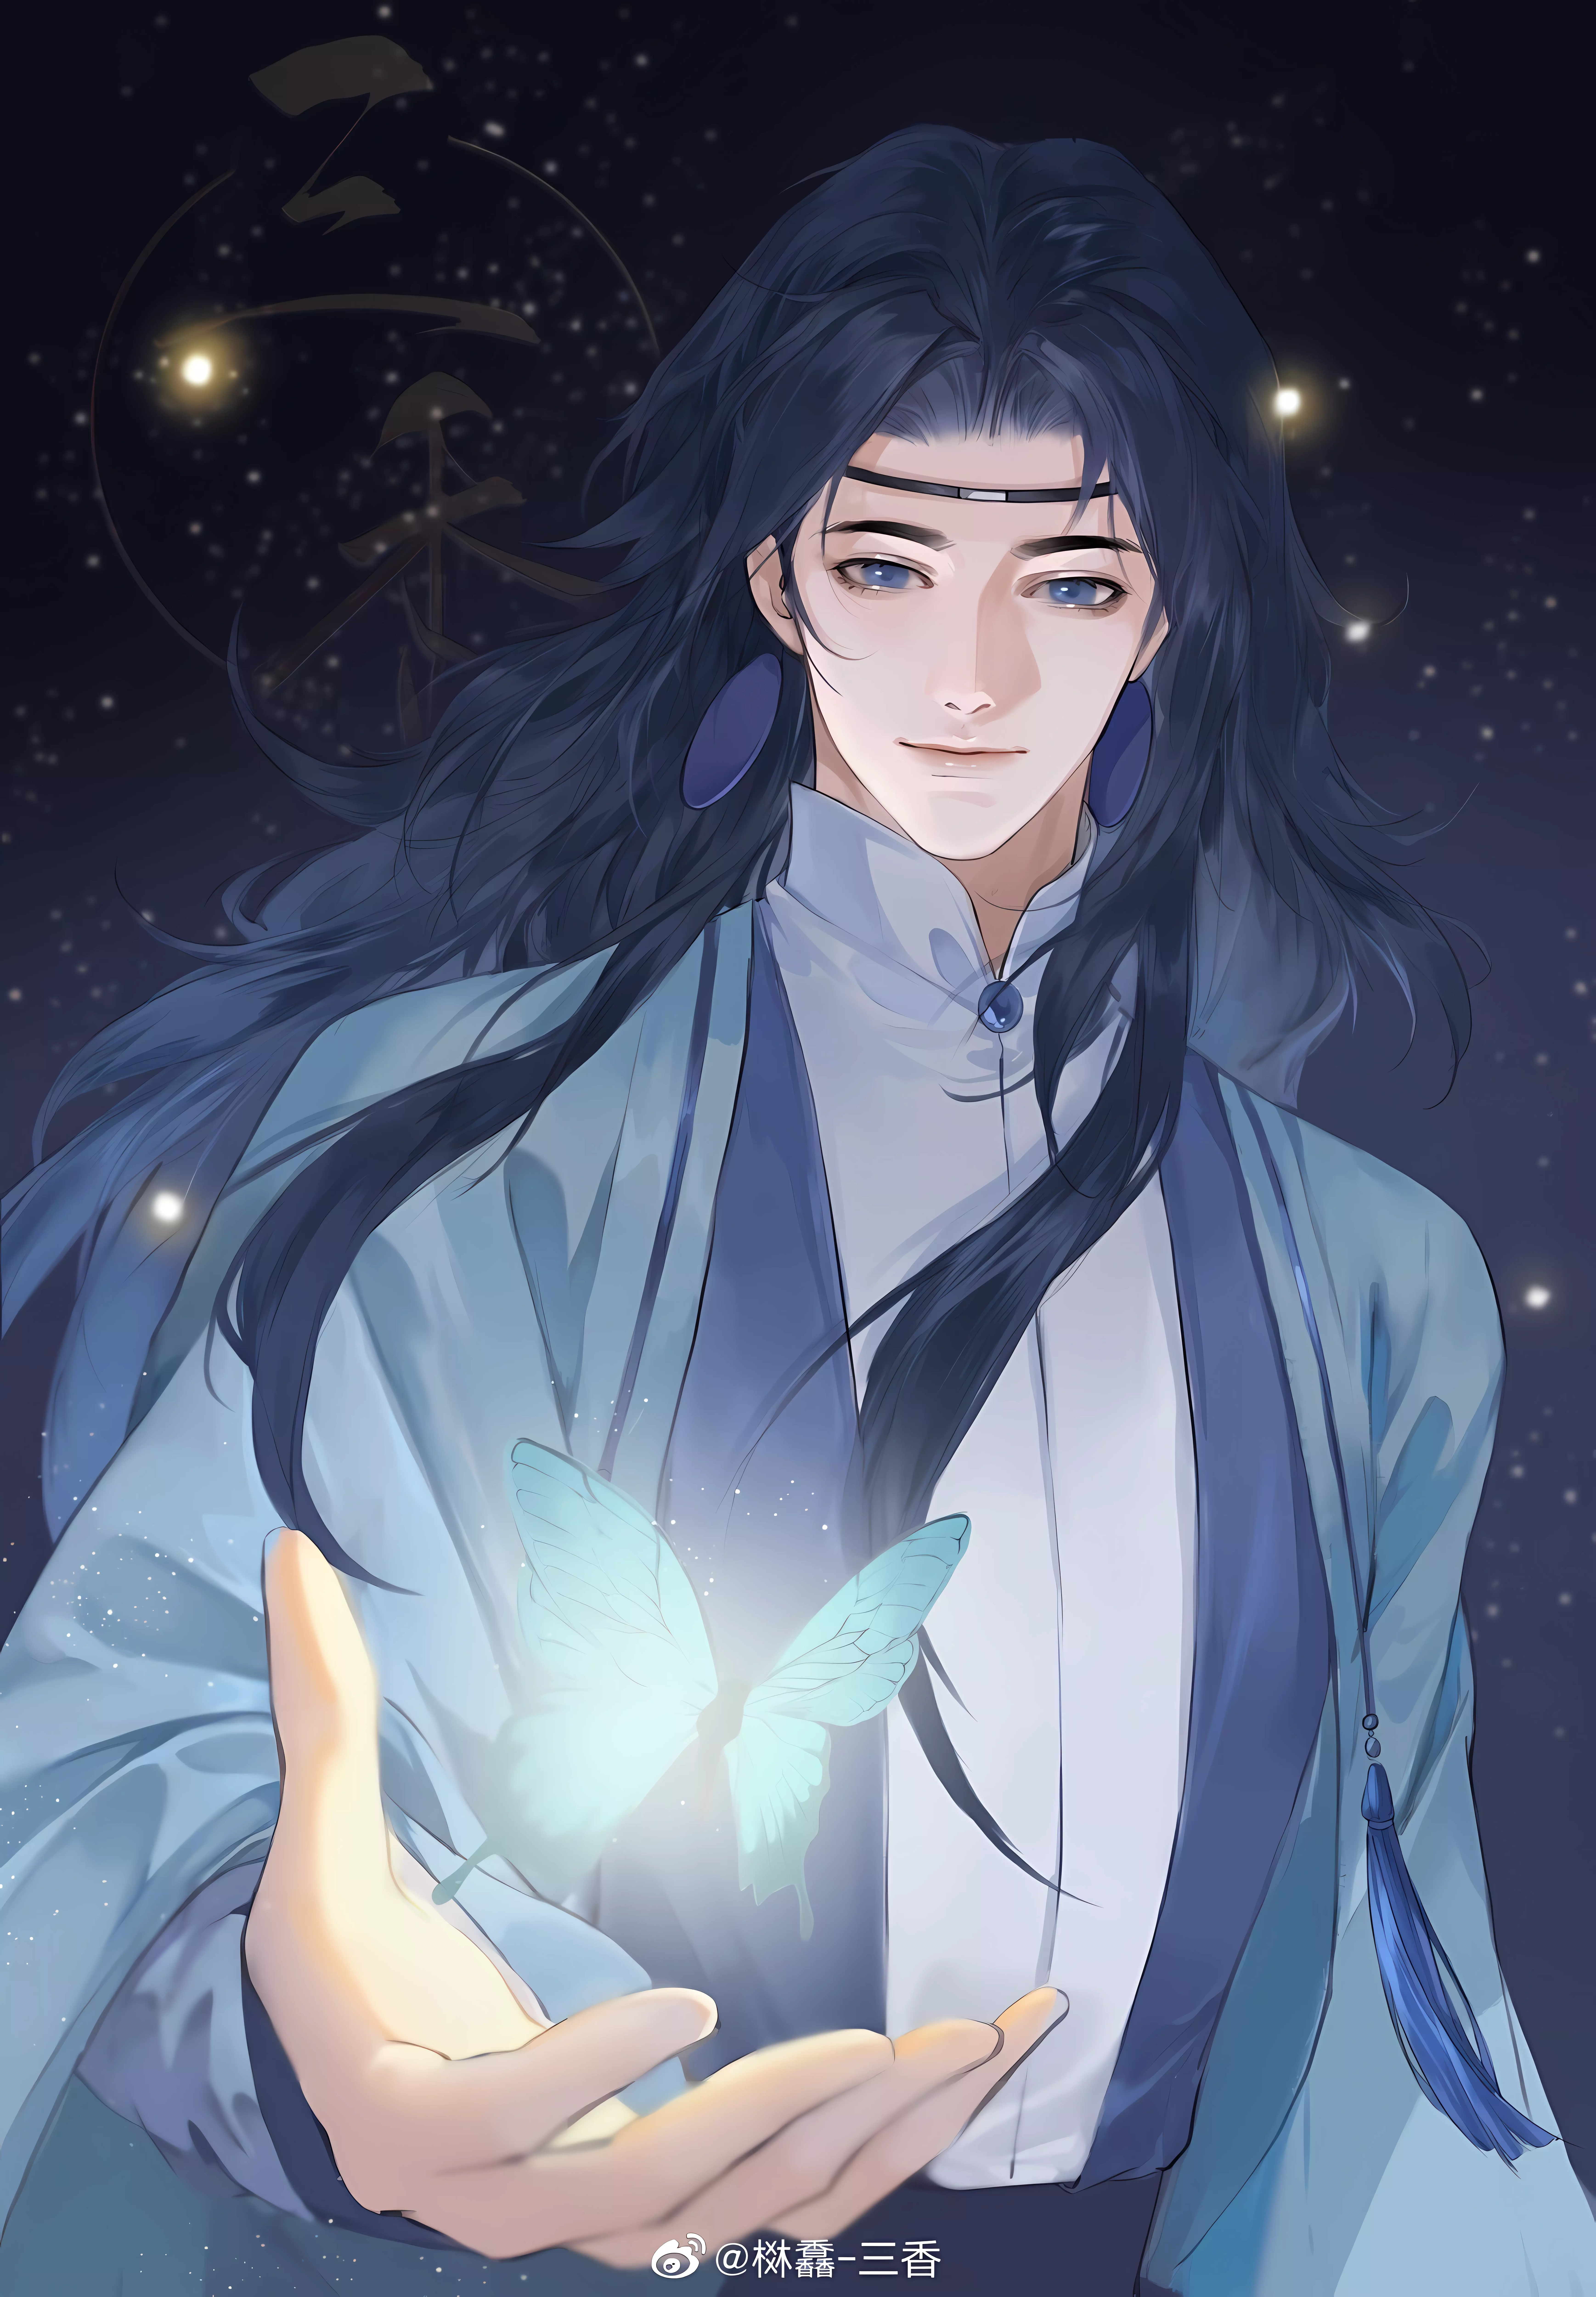 Dong Fang Project Manga Portrait Display Anime Boys Long Hair Butterfly Stars Smiling Insect Waterma 8640x12432